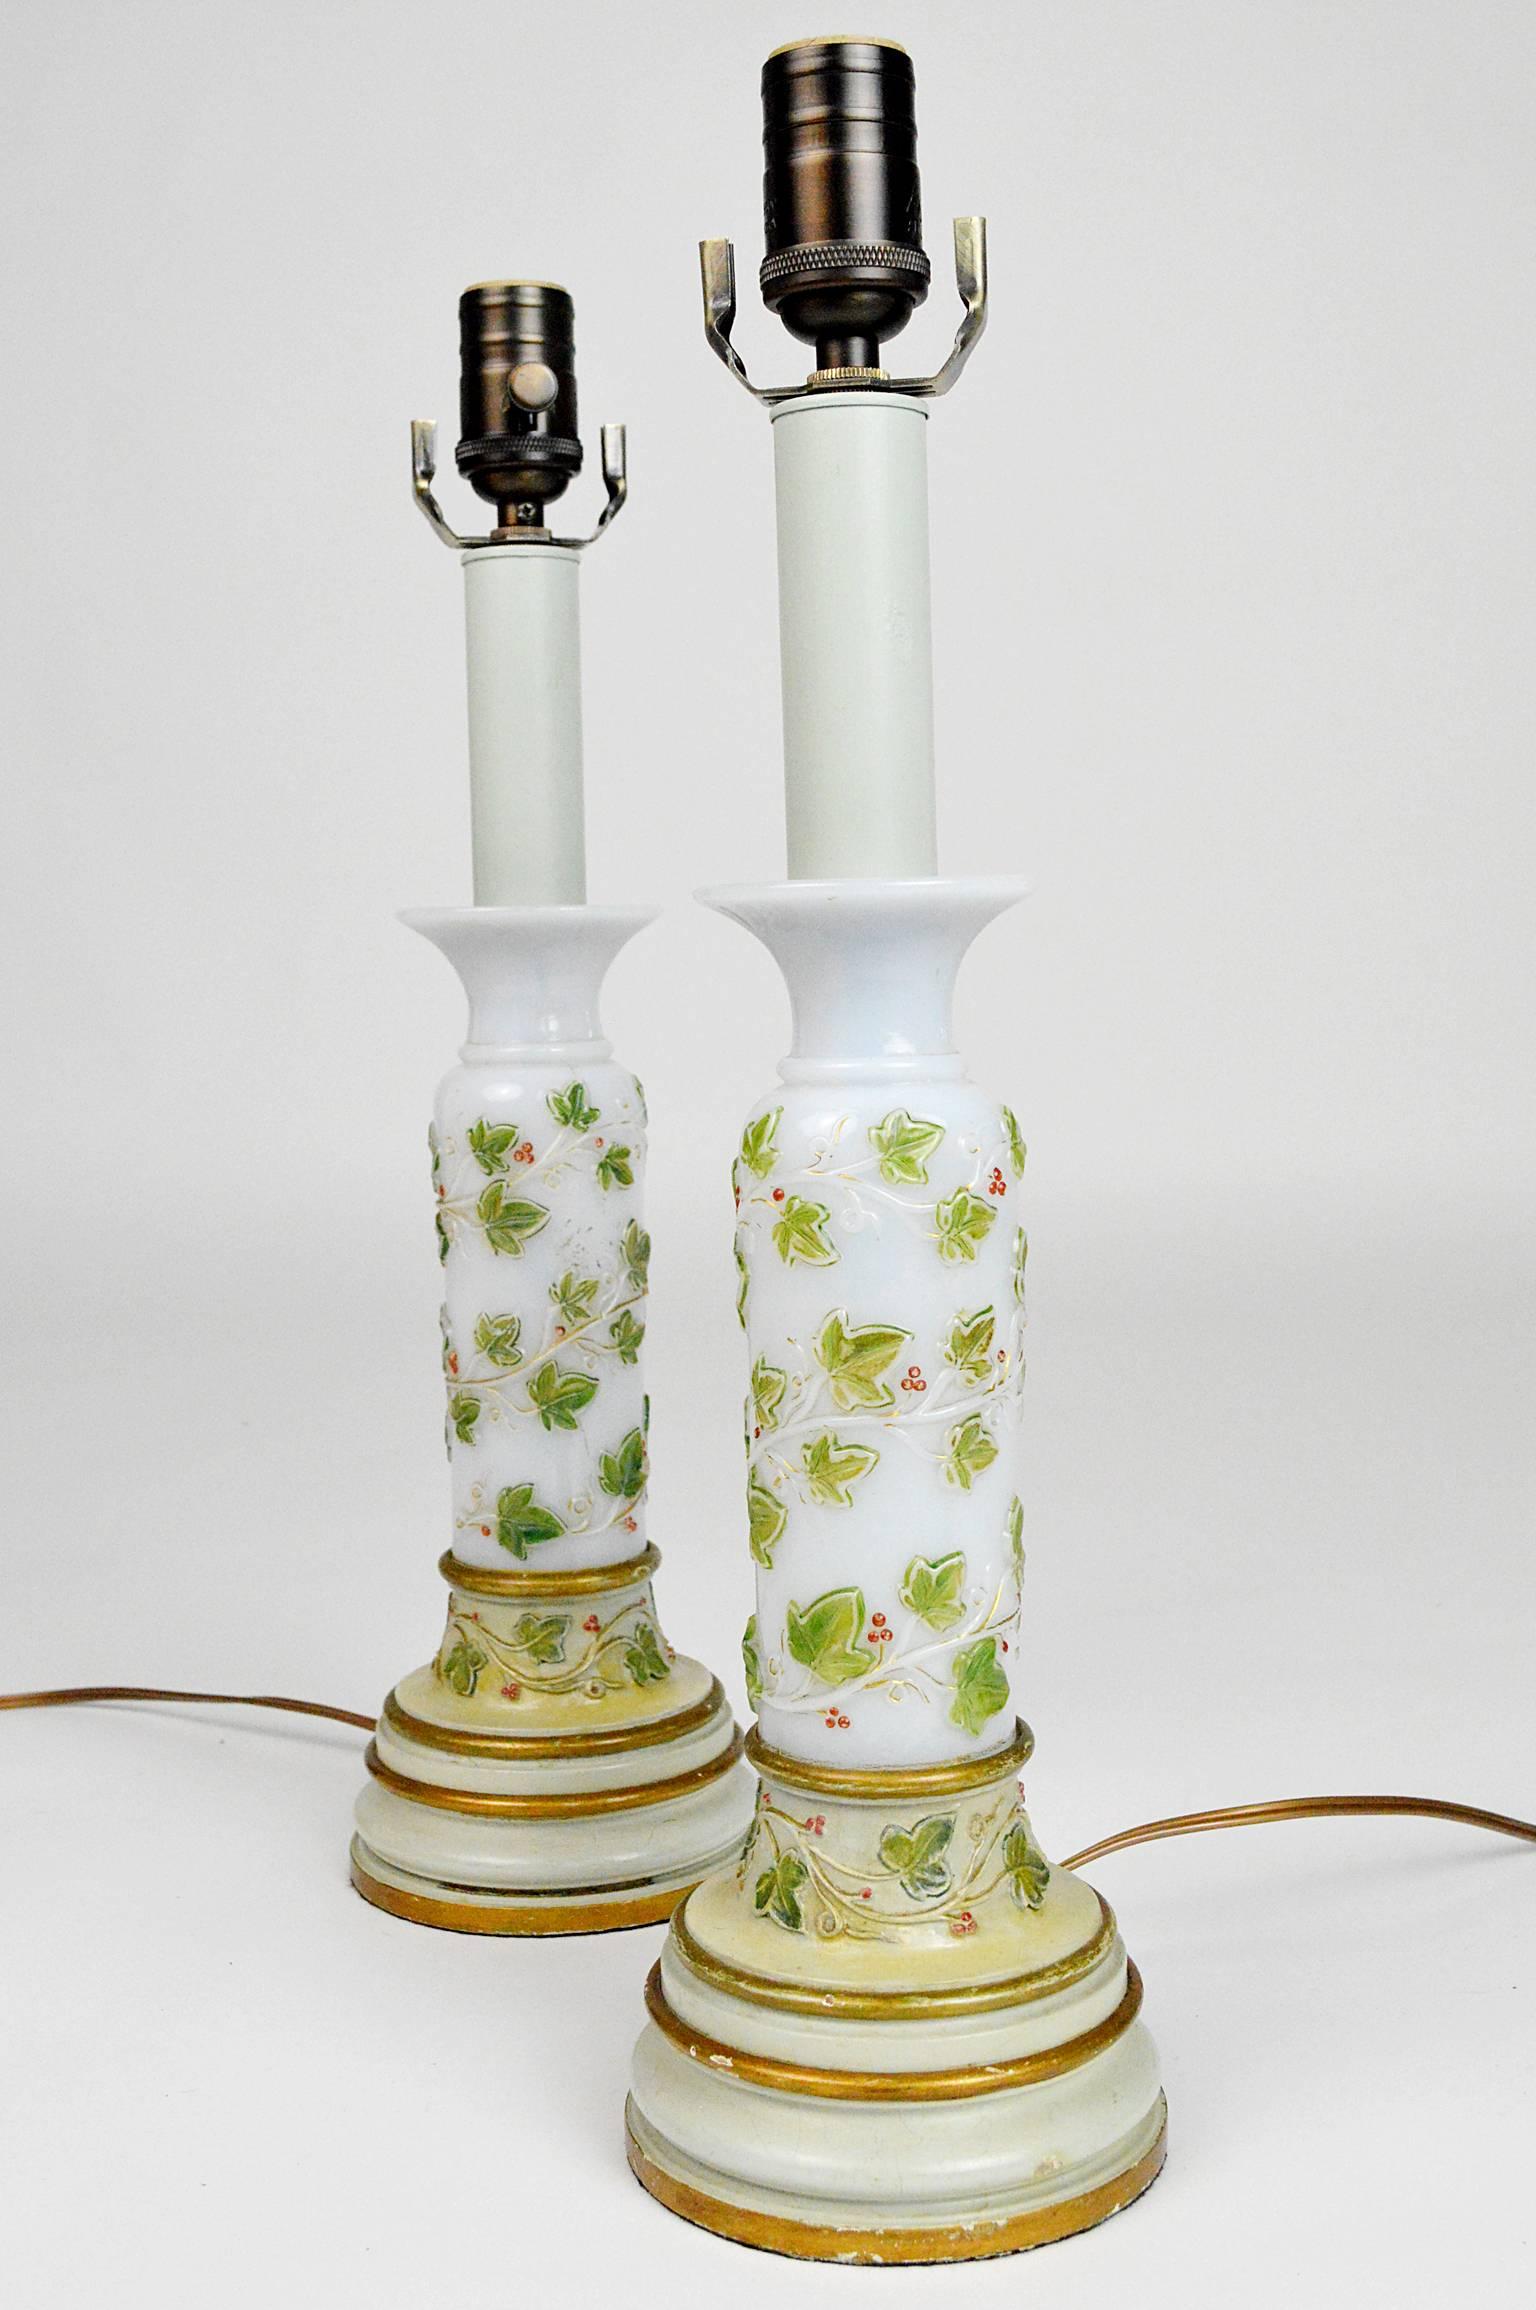 Pair of French opaline glass table lamps with hand-painted and gilt foliage, raised on turned wood bases.